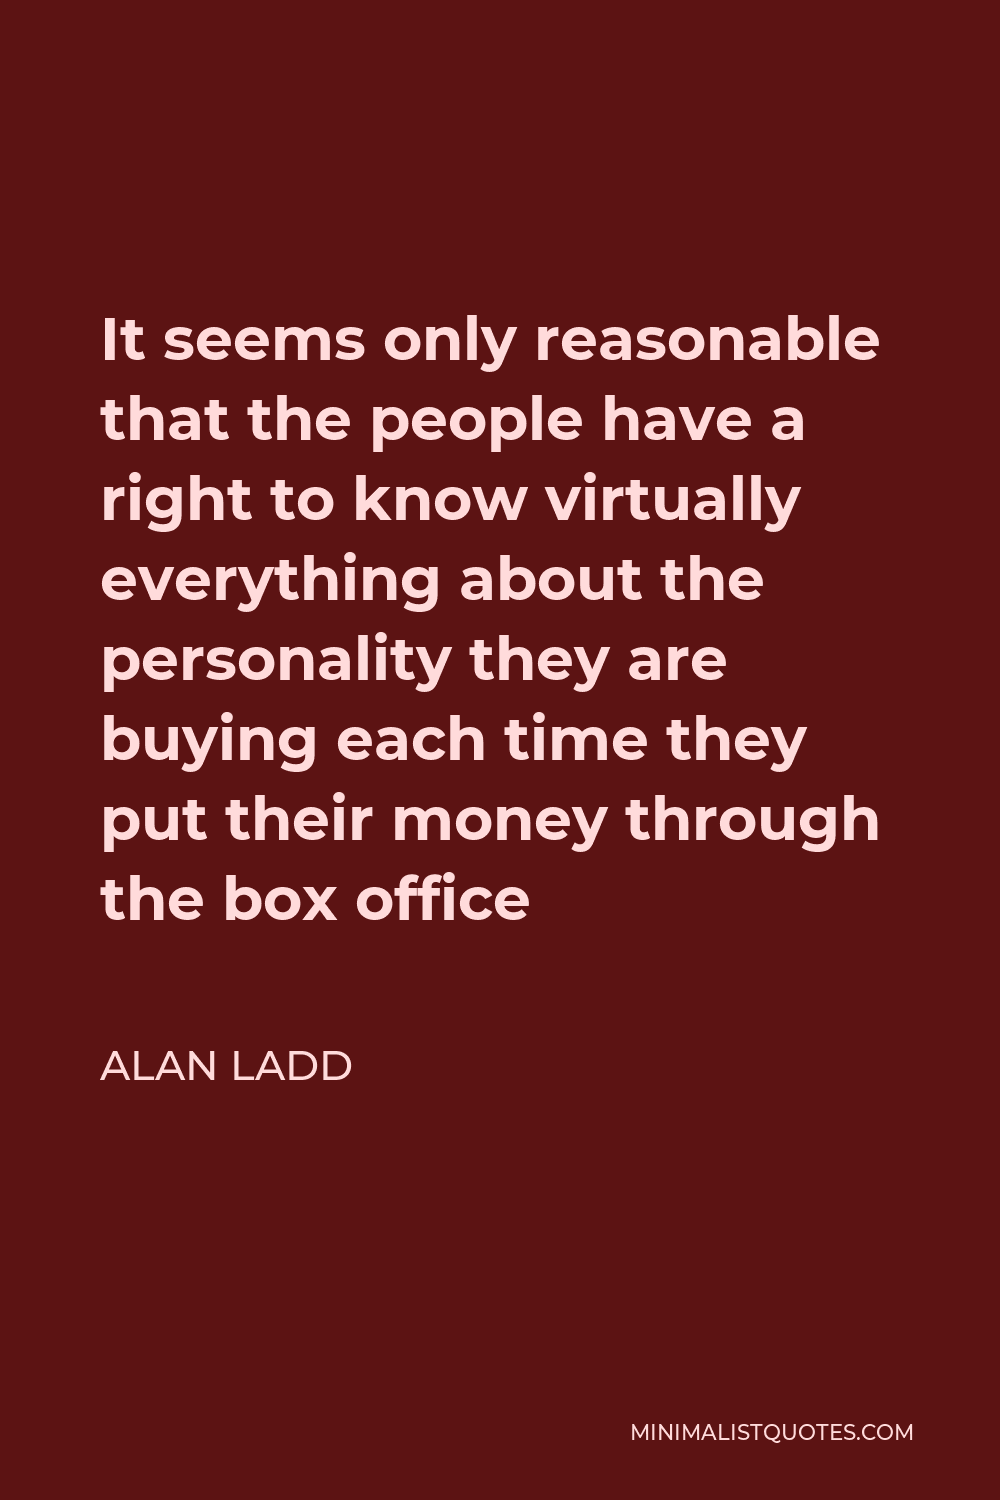 Alan Ladd Quote - It seems only reasonable that the people have a right to know virtually everything about the personality they are buying each time they put their money through the box office